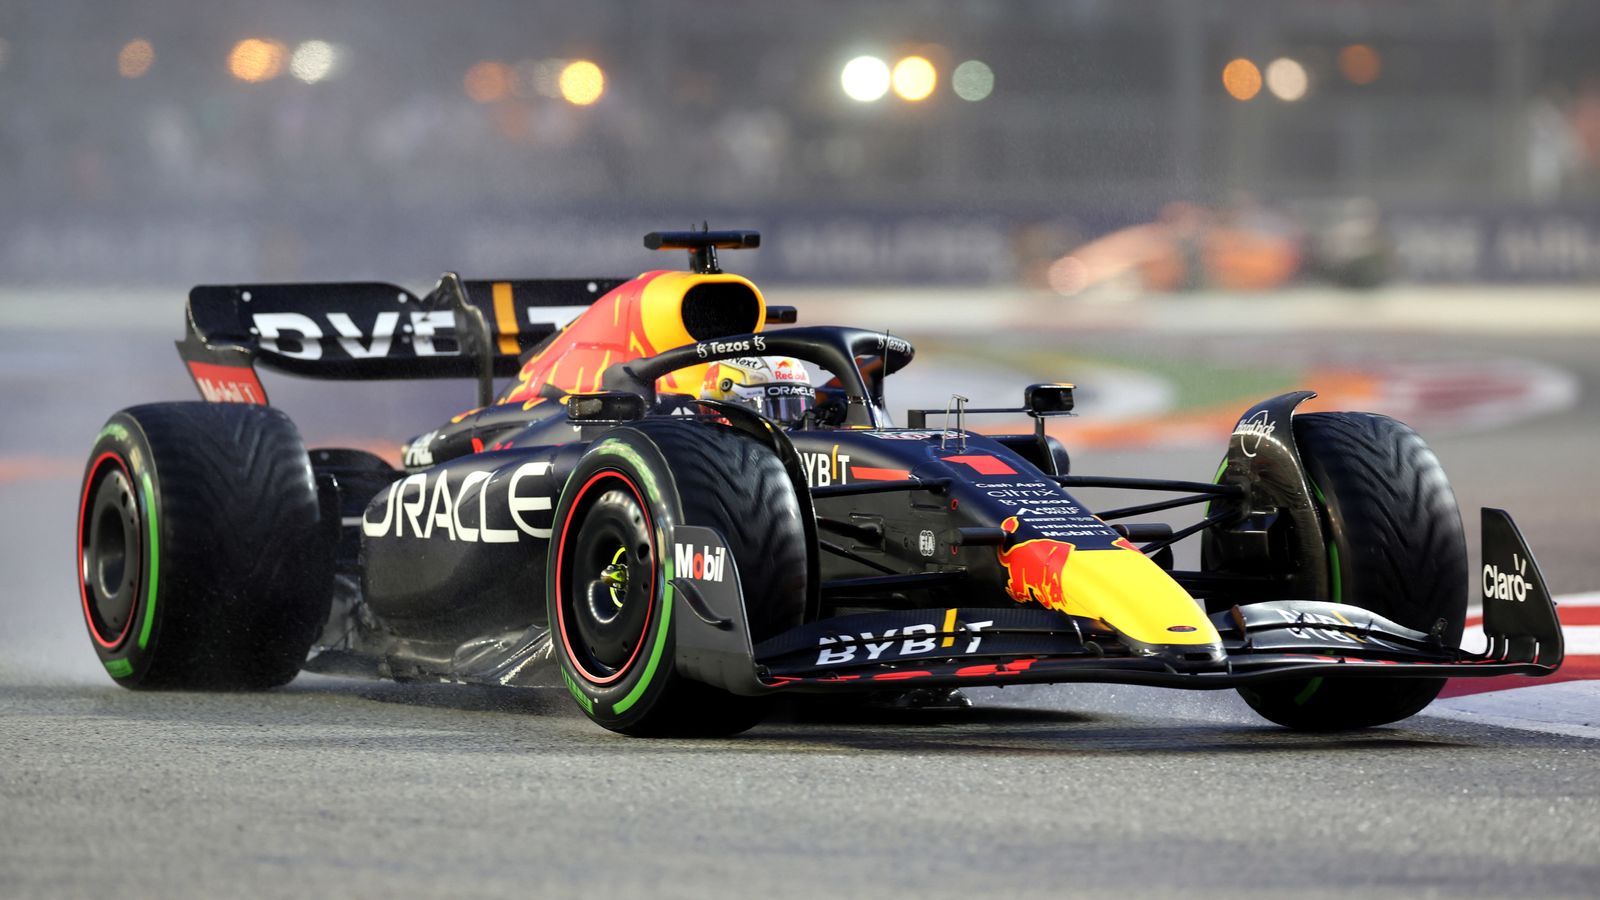 Singapore Grand Prix Final Practice and Qualifying as Max Verstappen